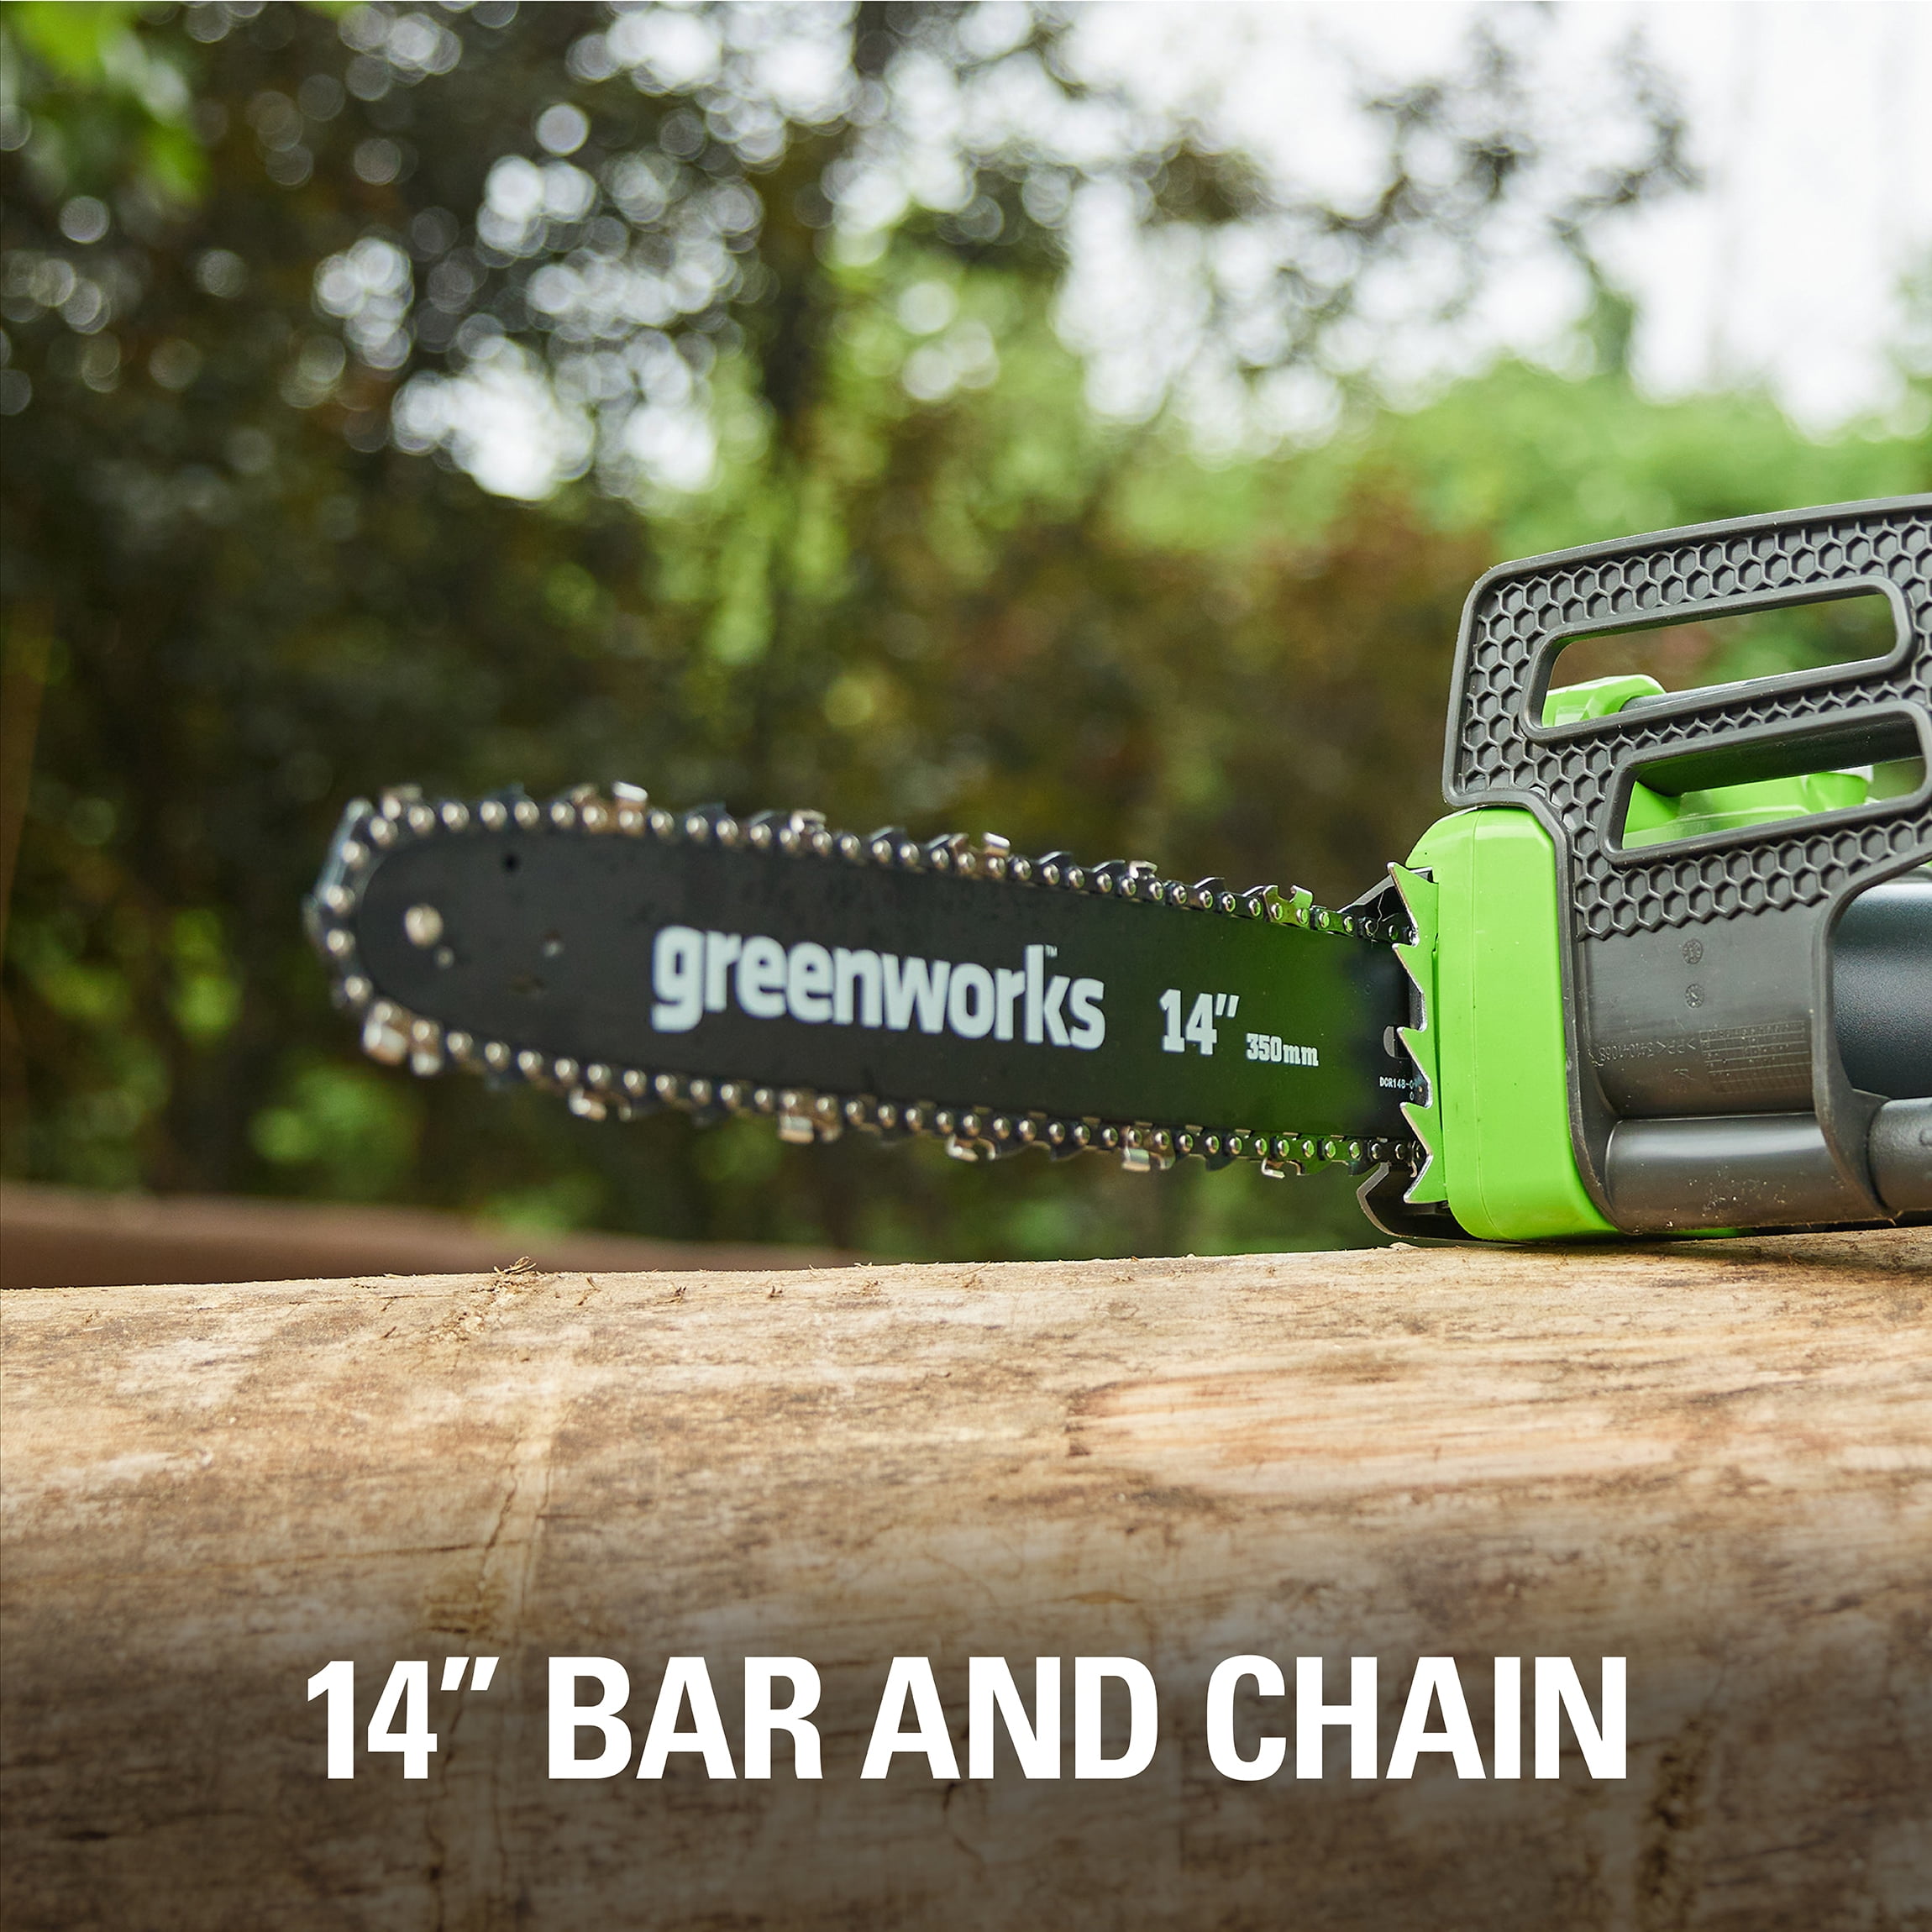 Greenworks 105 Amp 14-inch Corded Electric Chainsaw, 20222 - 3